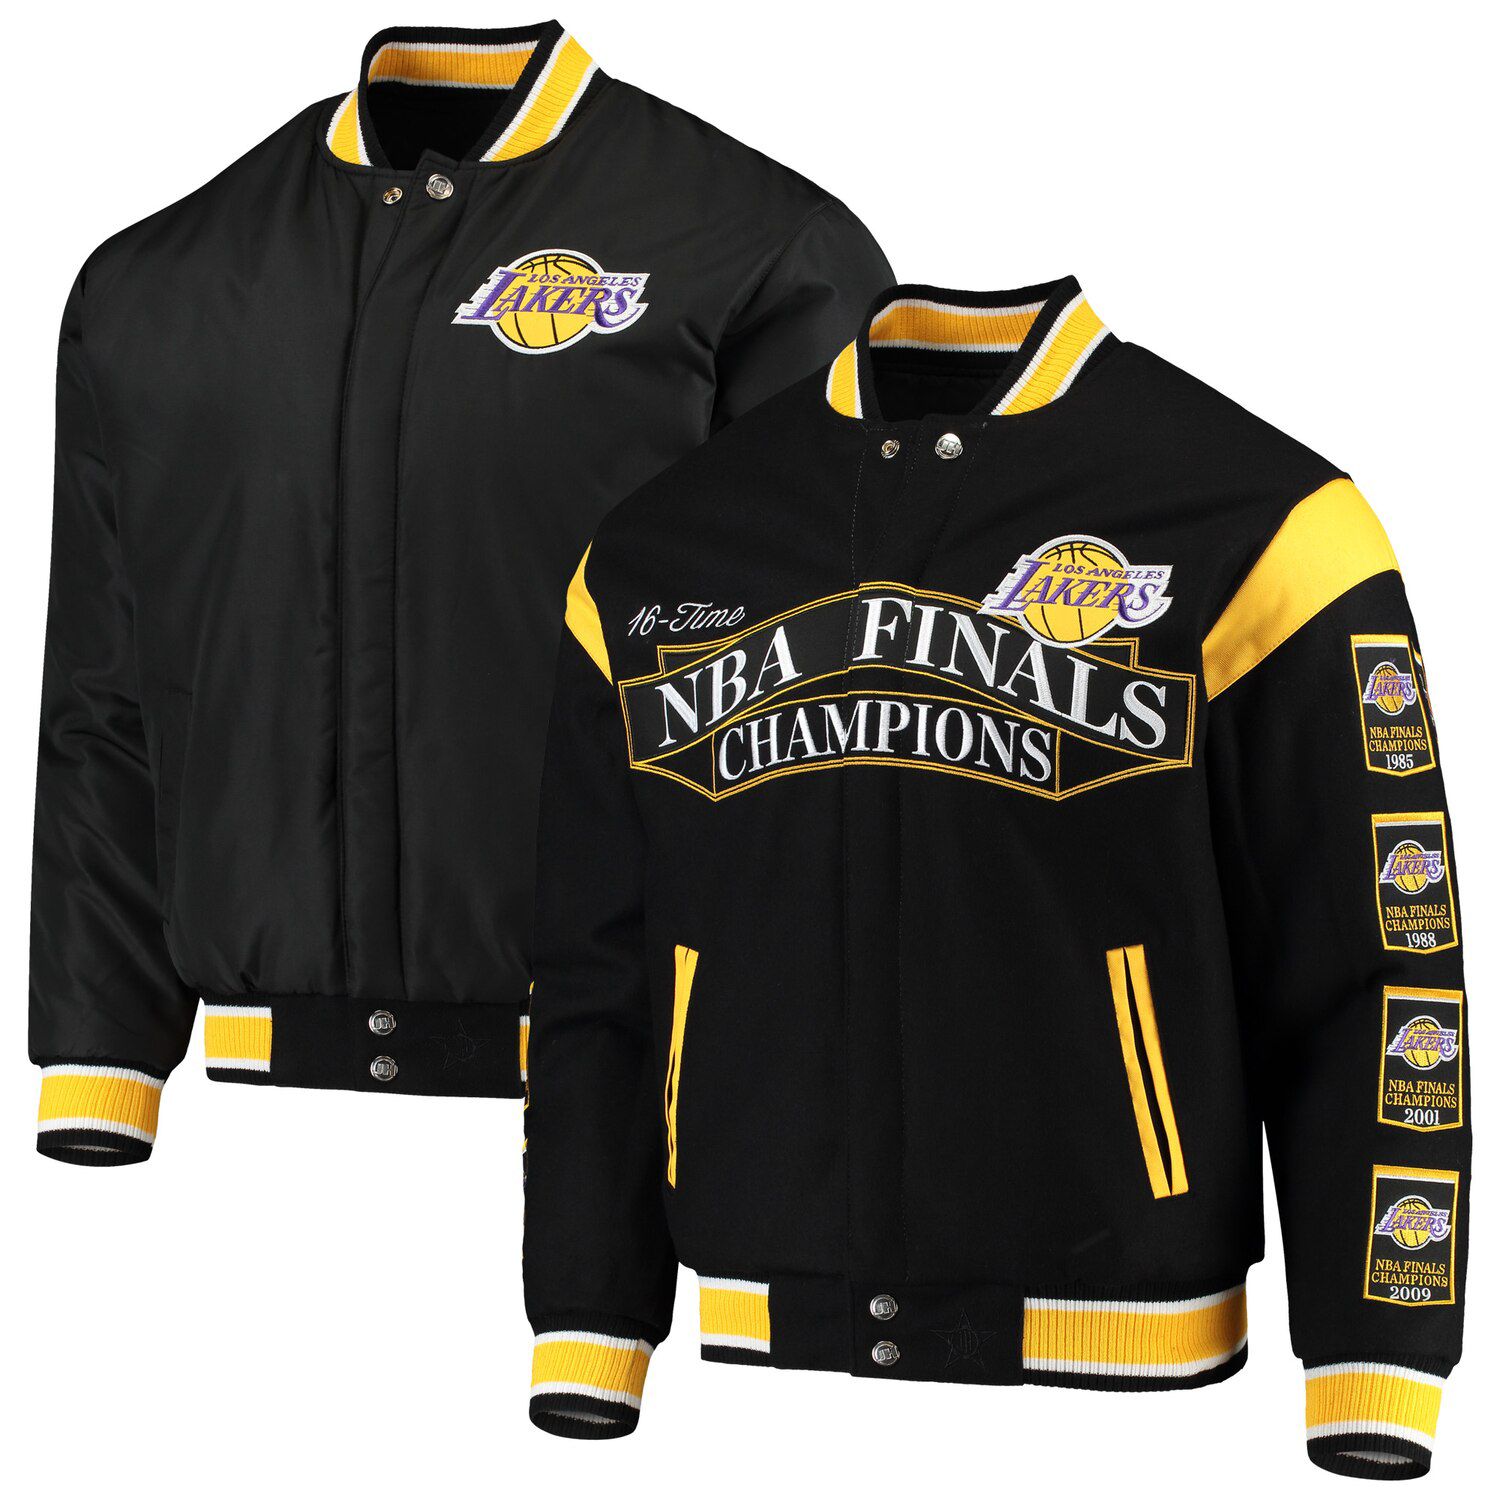 lakers puffer jacket